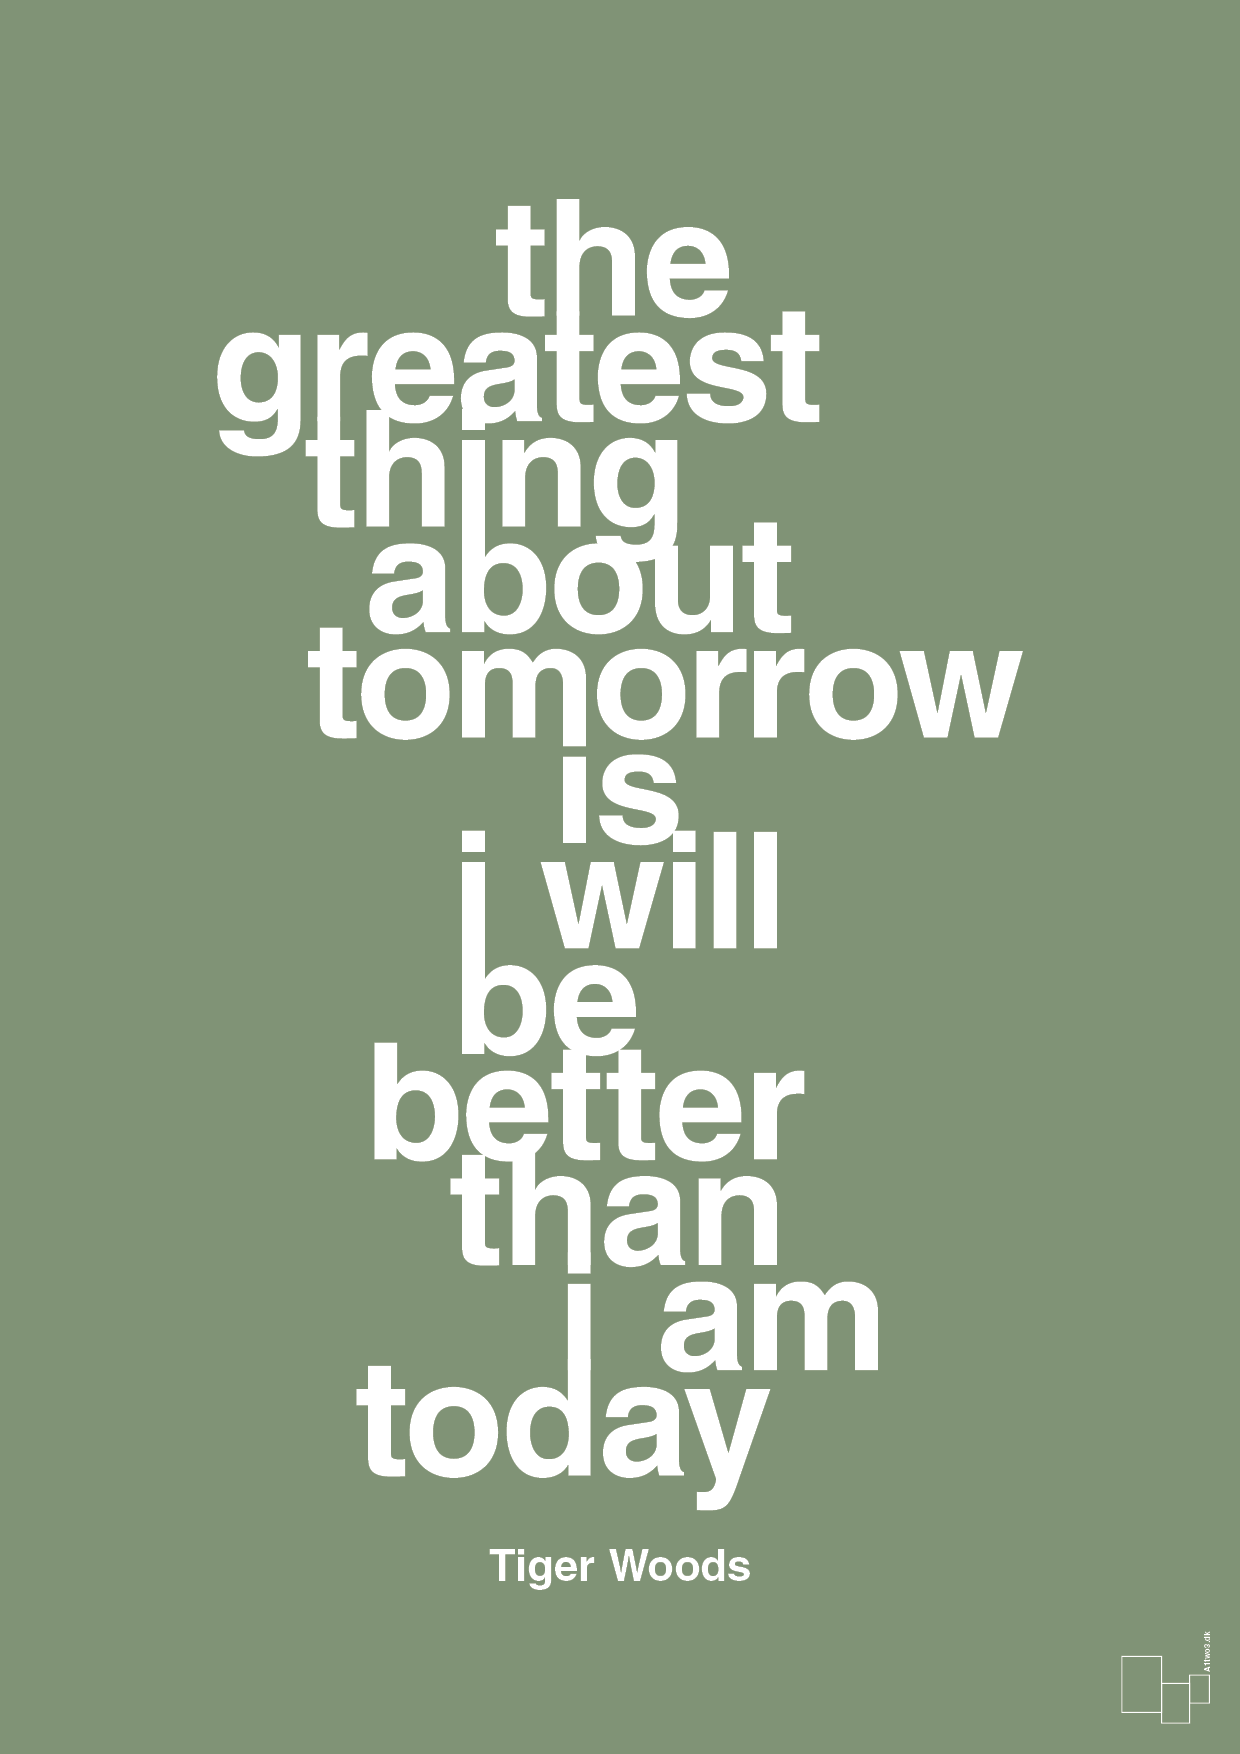 the greatest thing about tomorrow is i will be better than i am today - Plakat med Citater i Jade